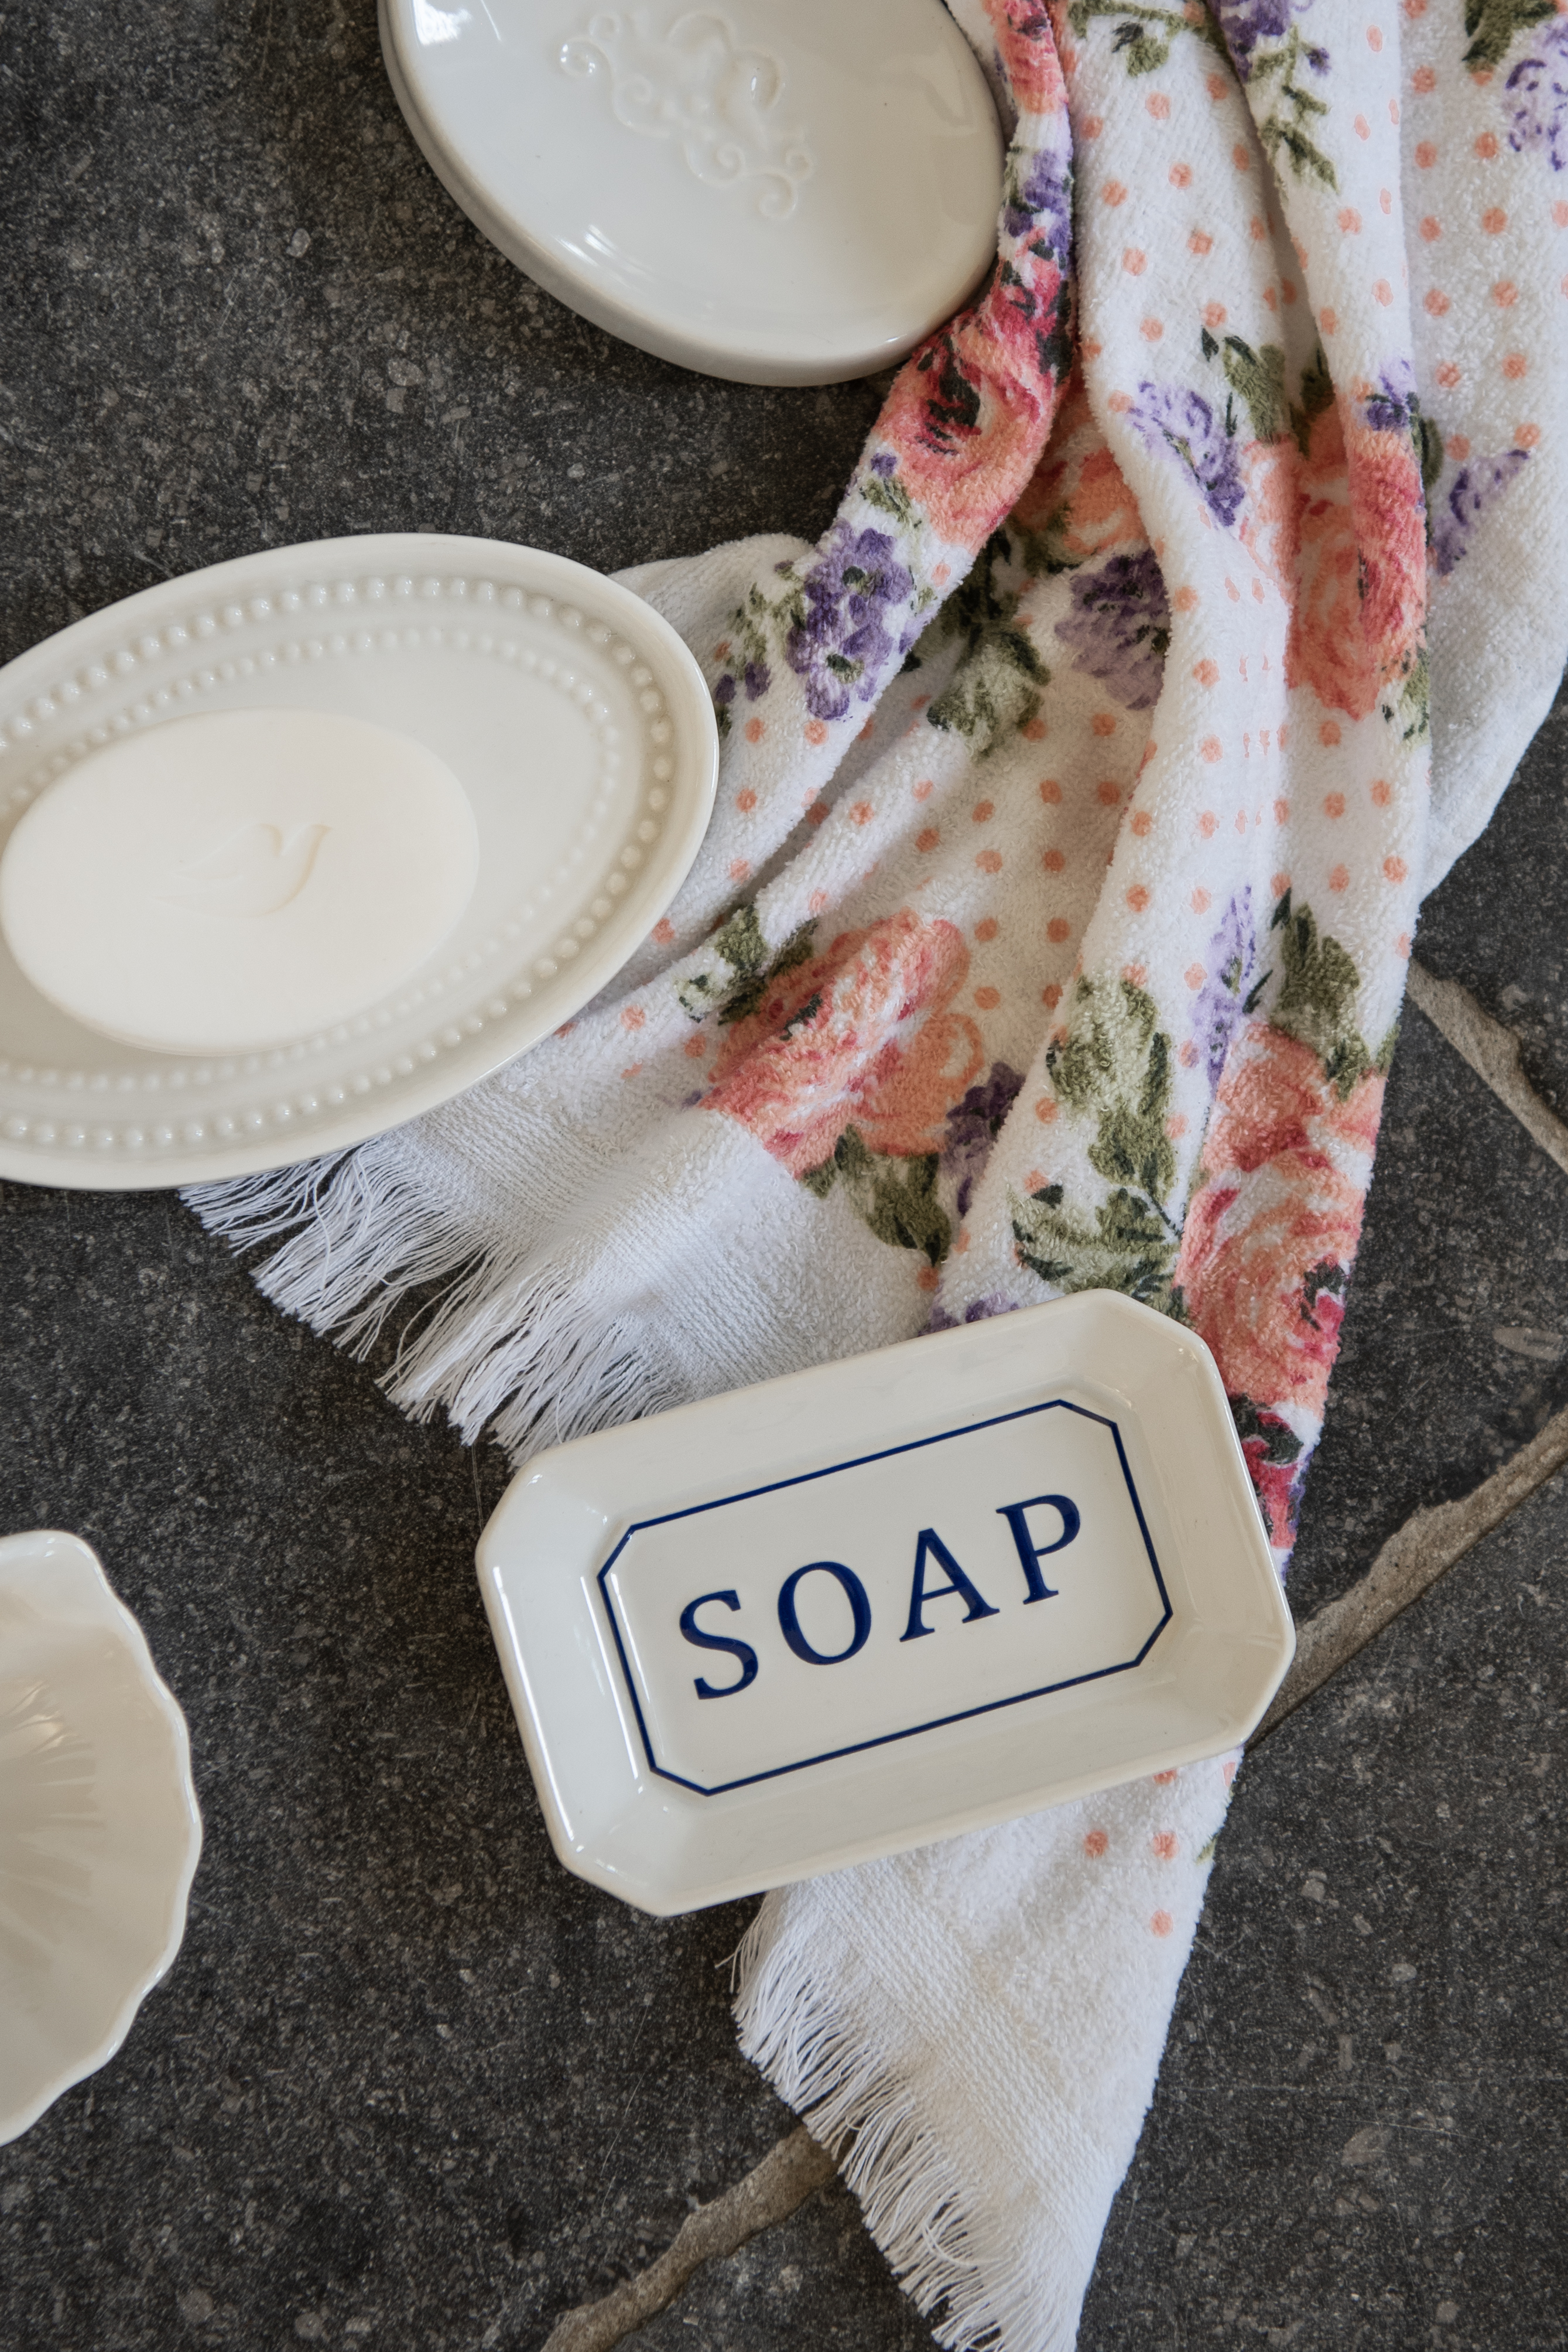 Two white ceramic soap dishes lying on the tiled floor with a guest towel